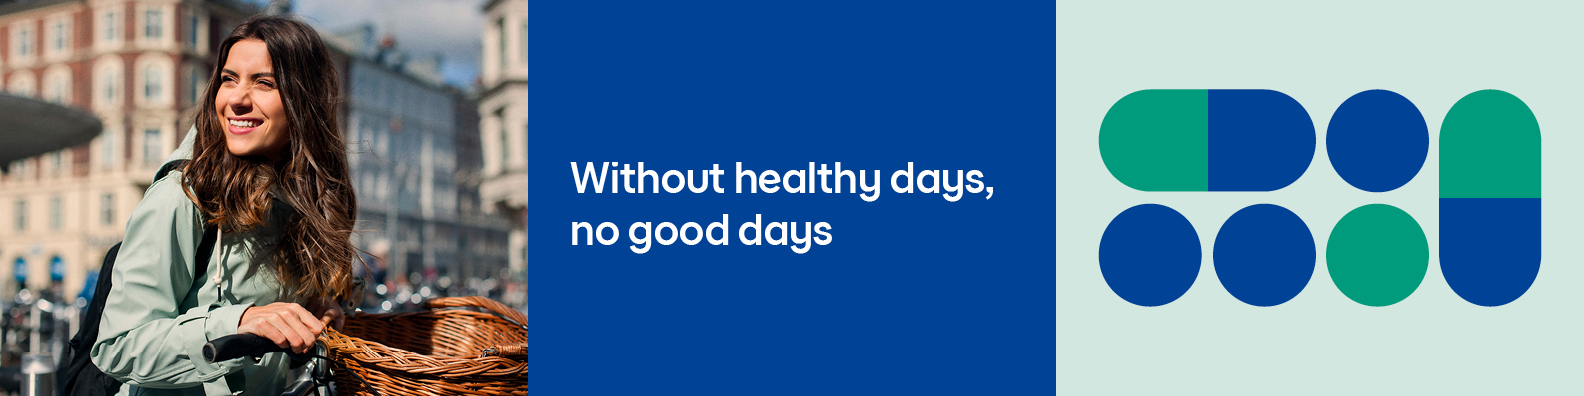 Without healthy days, no good days